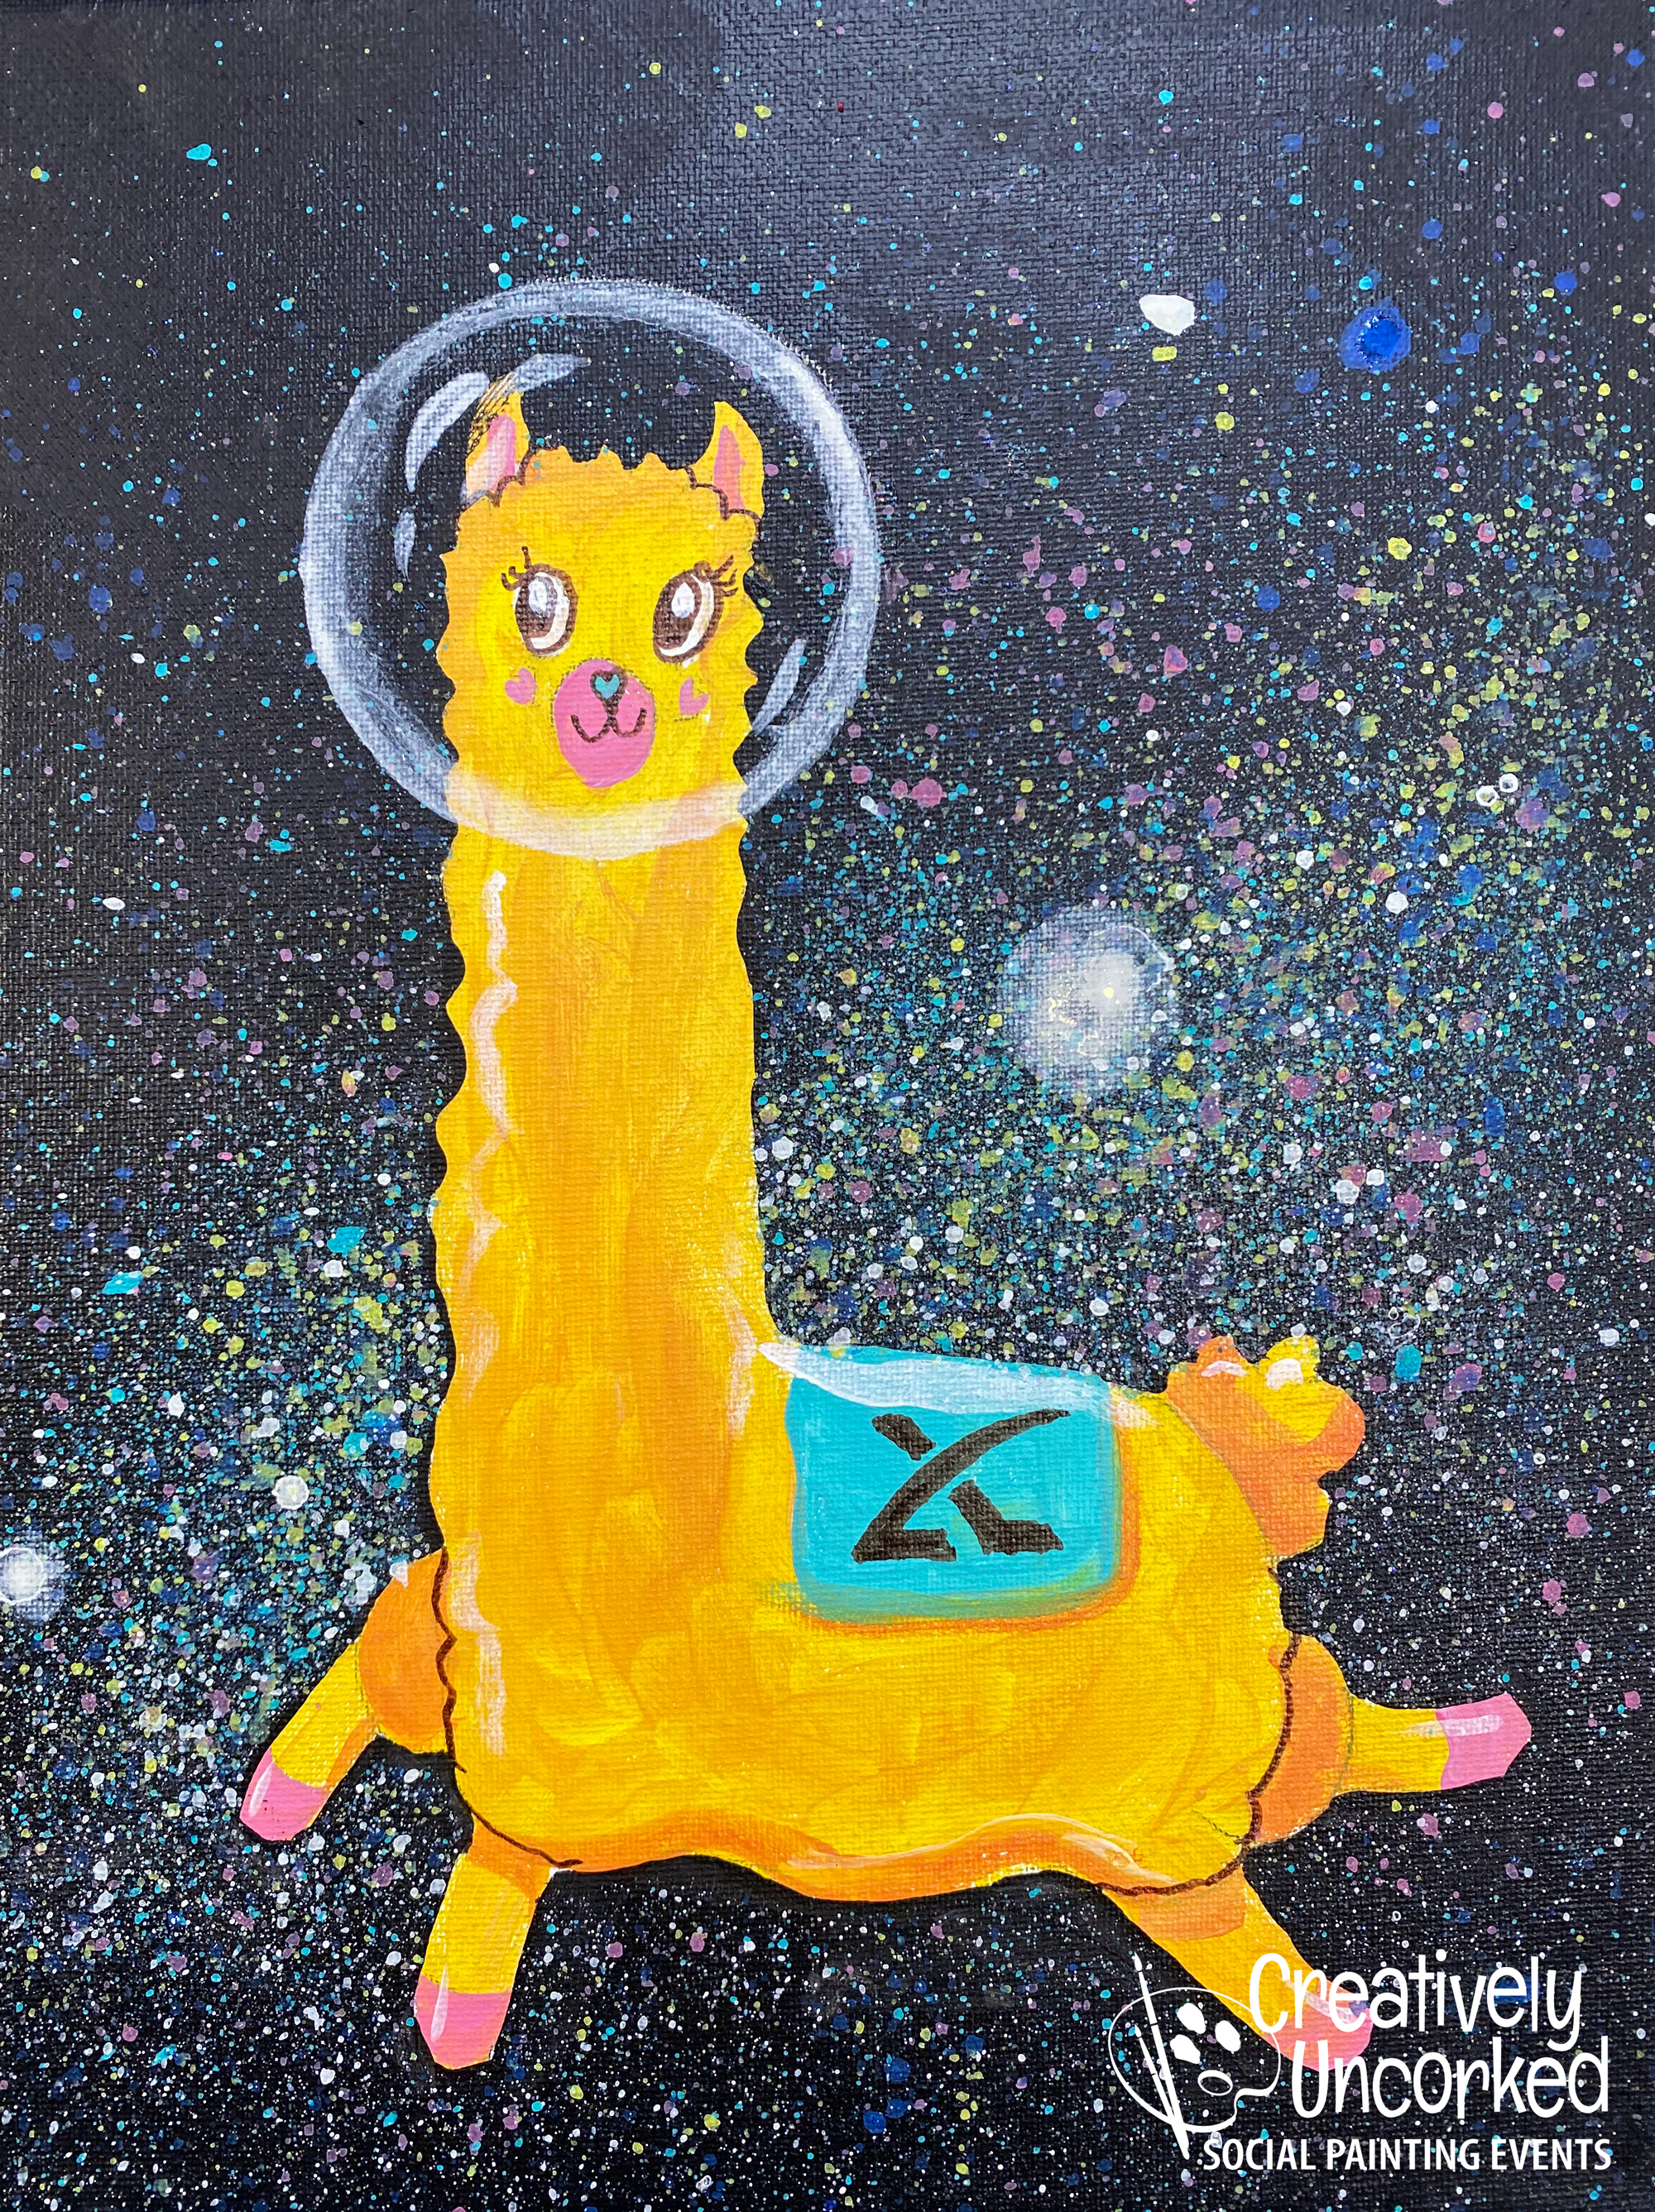 Space Llama from Creatively Uncorked http://creativelyuncorked.com/